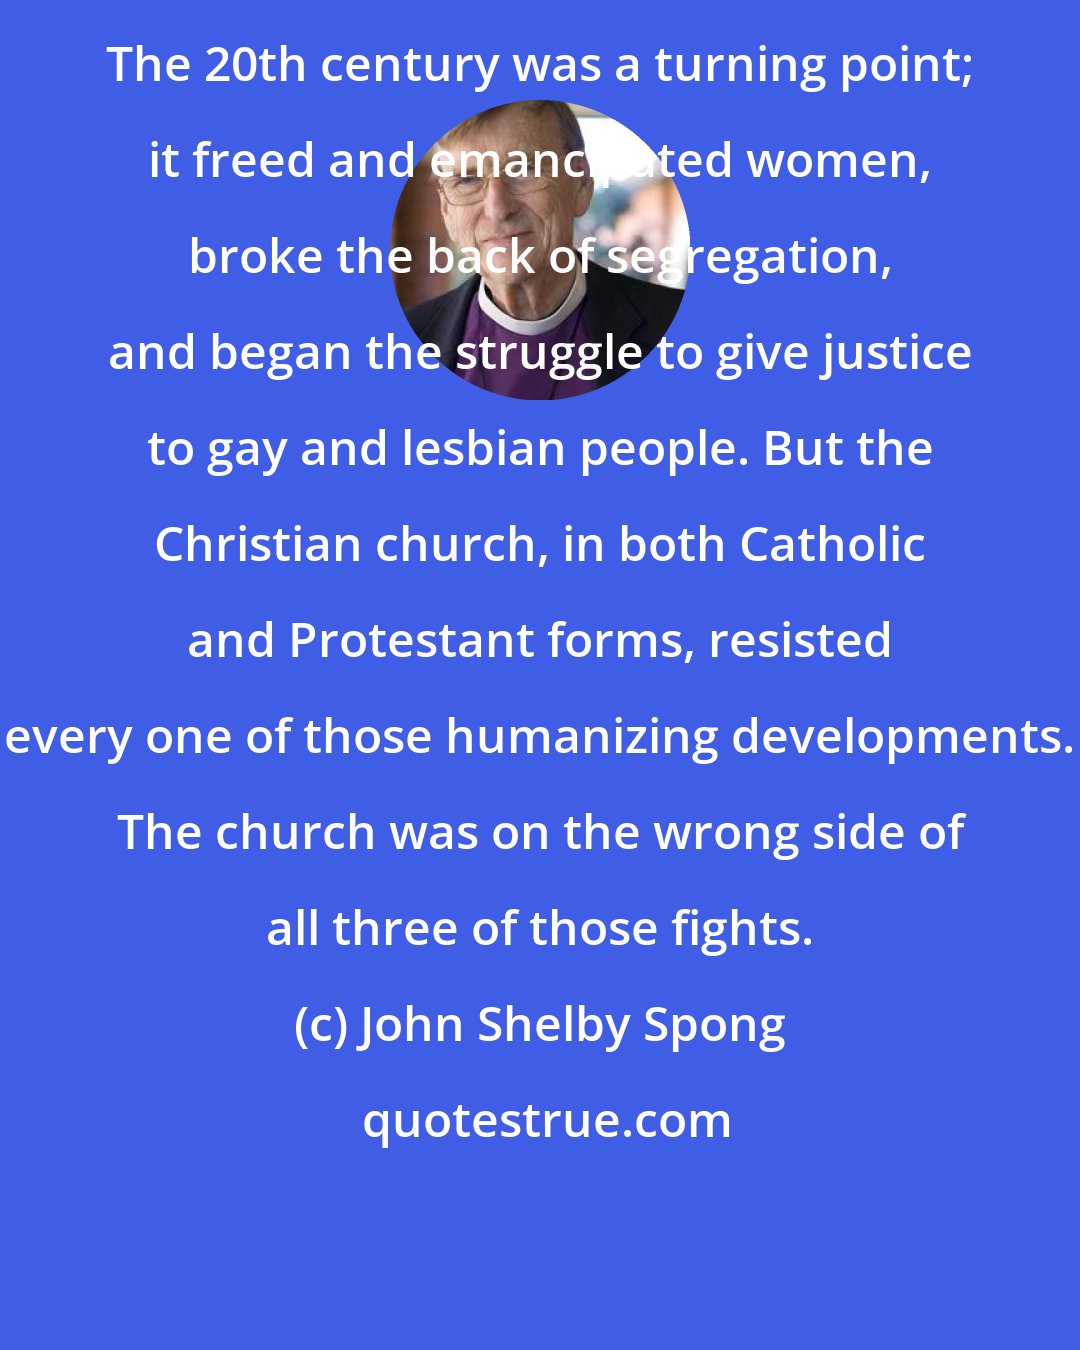 John Shelby Spong: The 20th century was a turning point; it freed and emancipated women, broke the back of segregation, and began the struggle to give justice to gay and lesbian people. But the Christian church, in both Catholic and Protestant forms, resisted every one of those humanizing developments. The church was on the wrong side of all three of those fights.